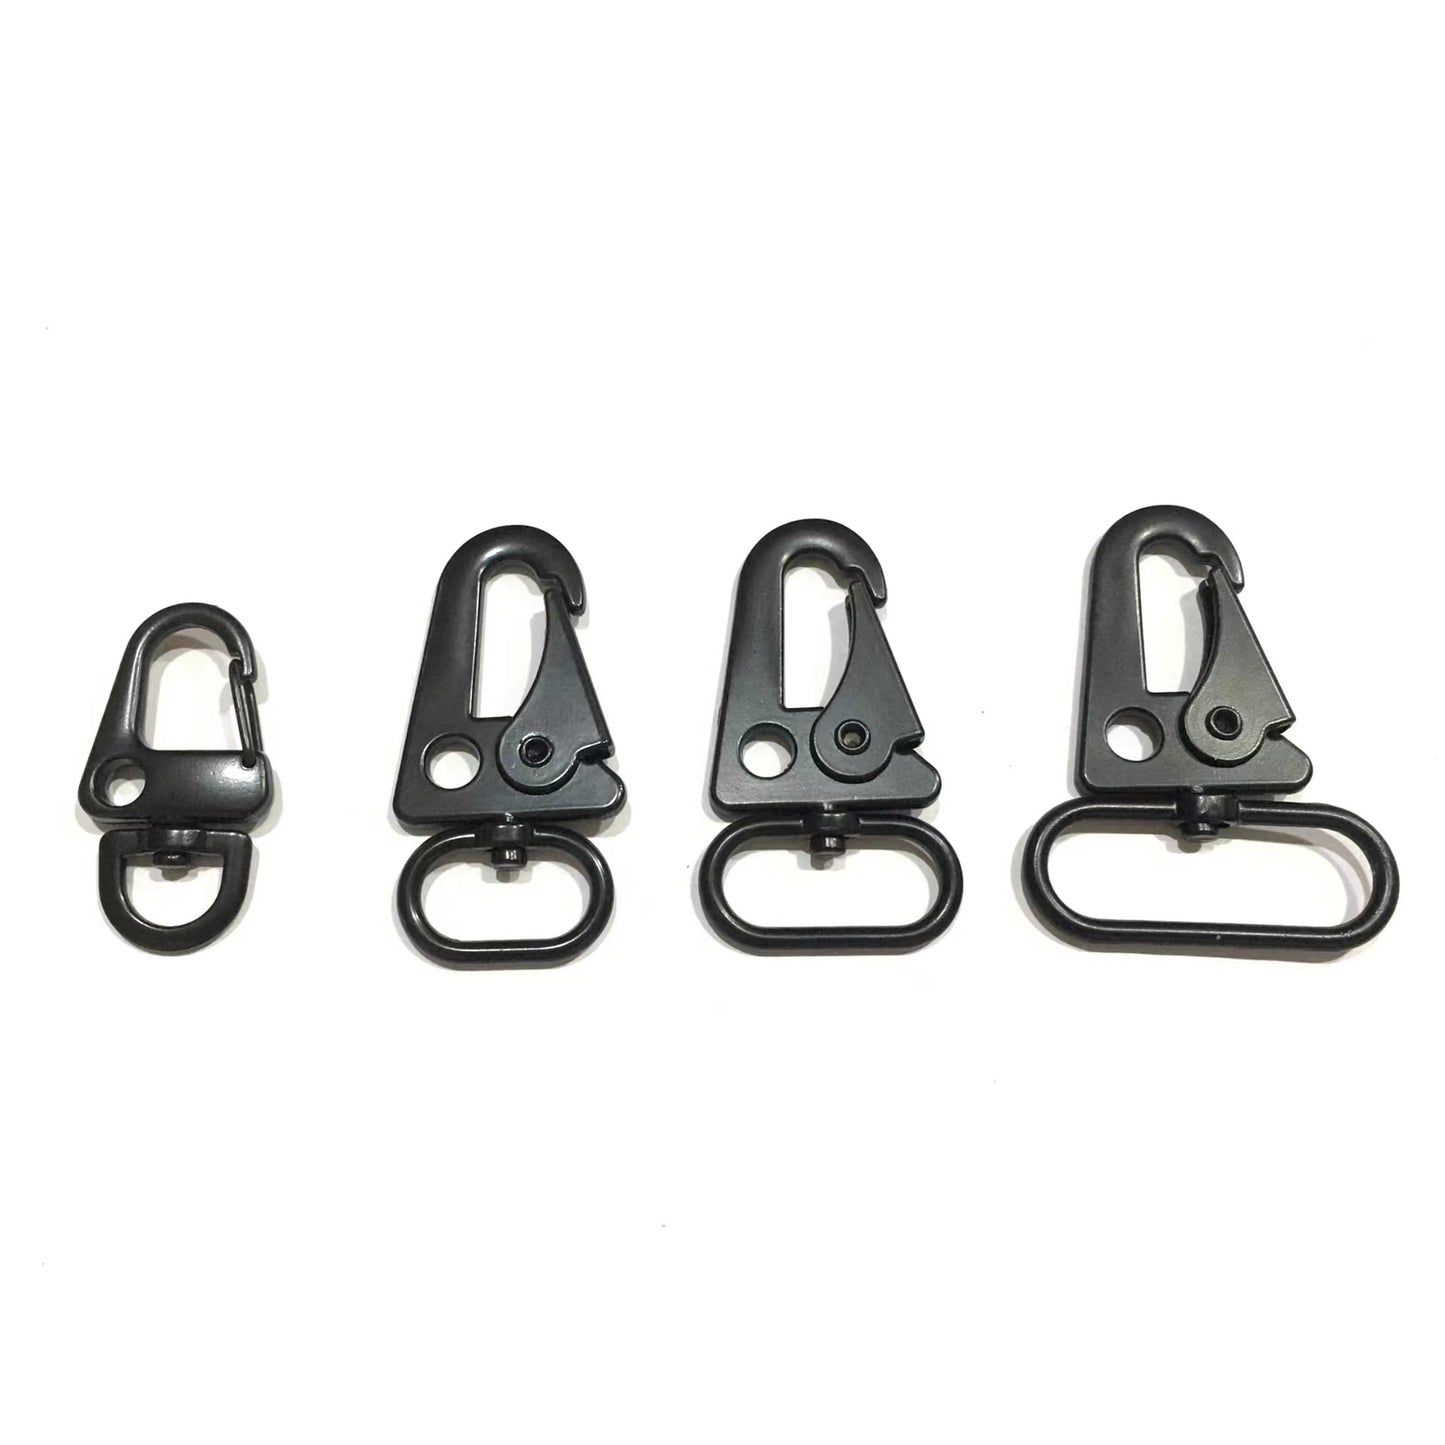 Outdoor Accessory Mountaineering Olecranon Hook Quick release sling Carabiner Nylon Straps Key Chain-56